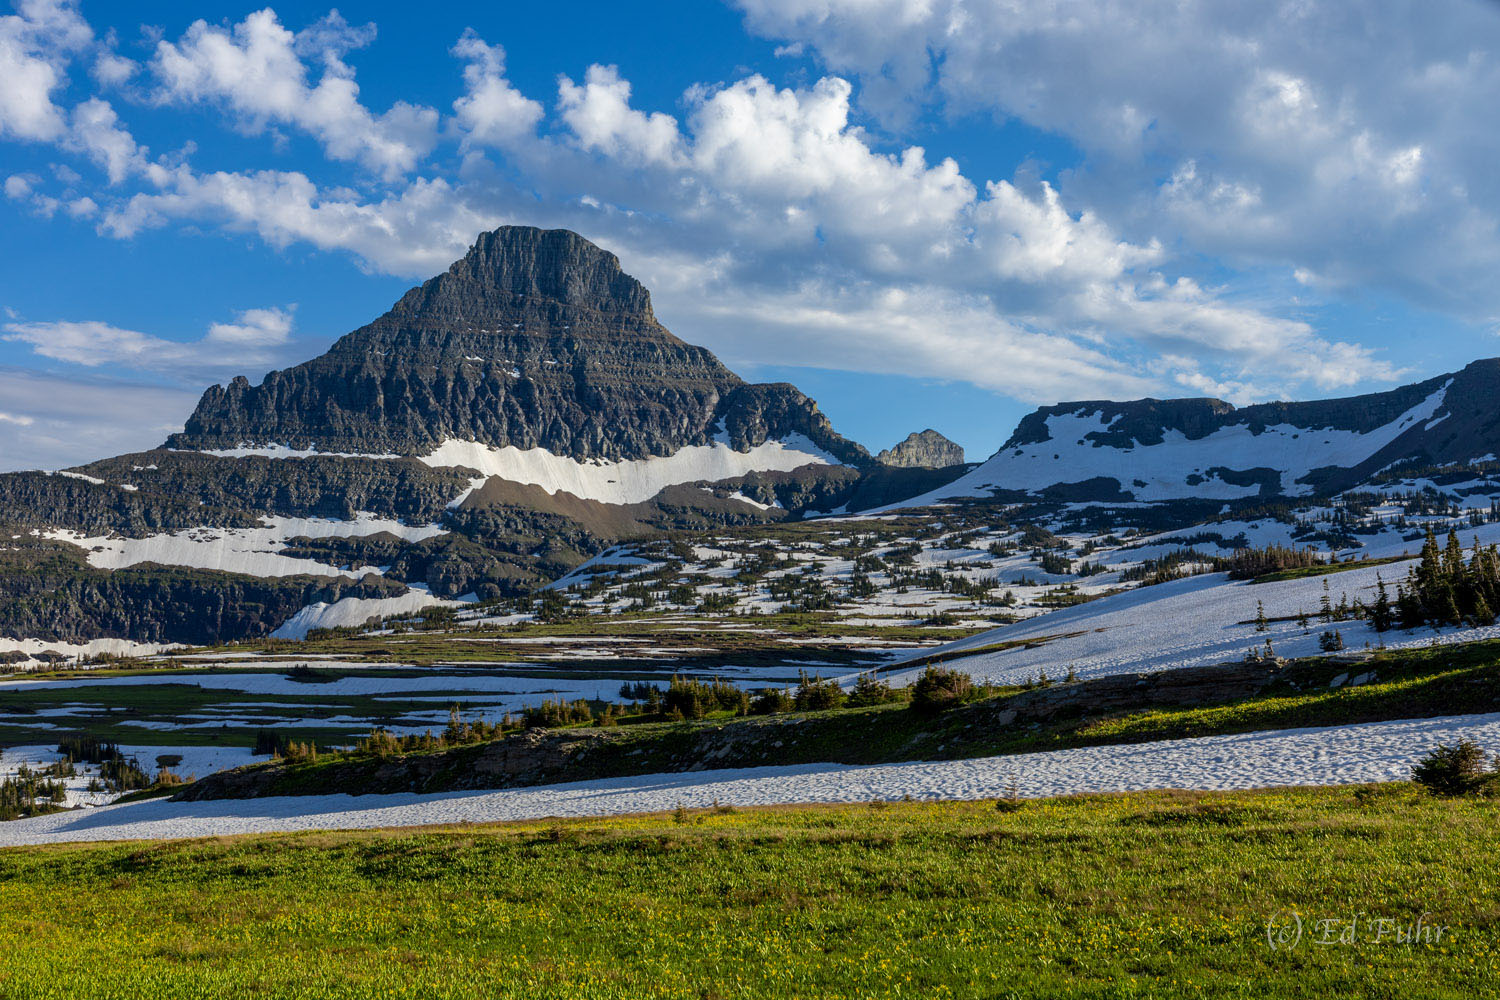 Rising prominently above Logan's Pass, Reynolds Mountain is one of the landmark peaks that dominates the Glacier skyline.